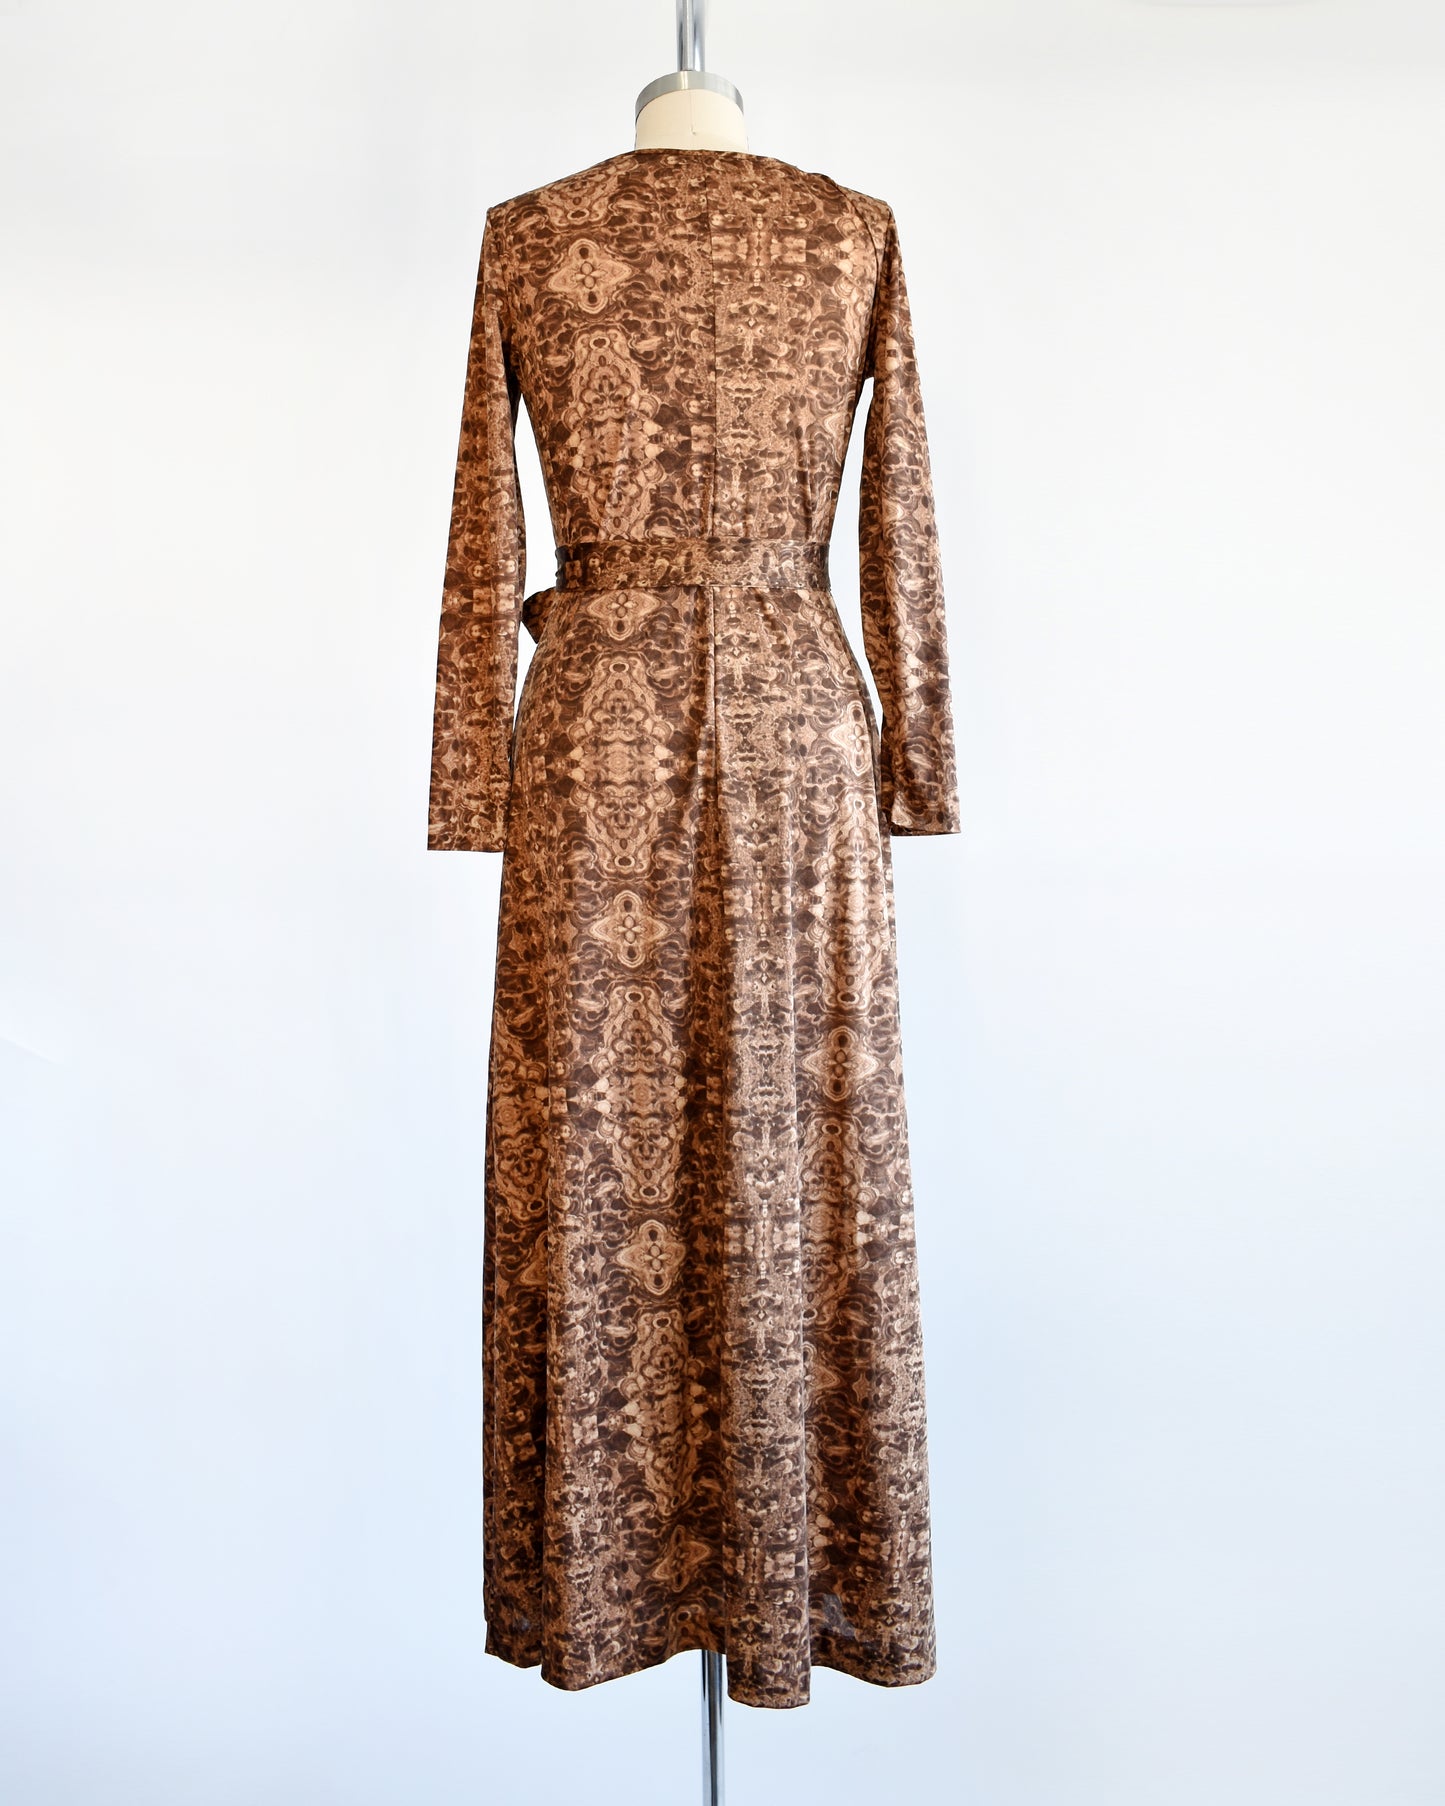 Back view of a vintage 1970s long sleeve maxi dress which features a psychedelic kaleidoscope pattern in light and dark brown.